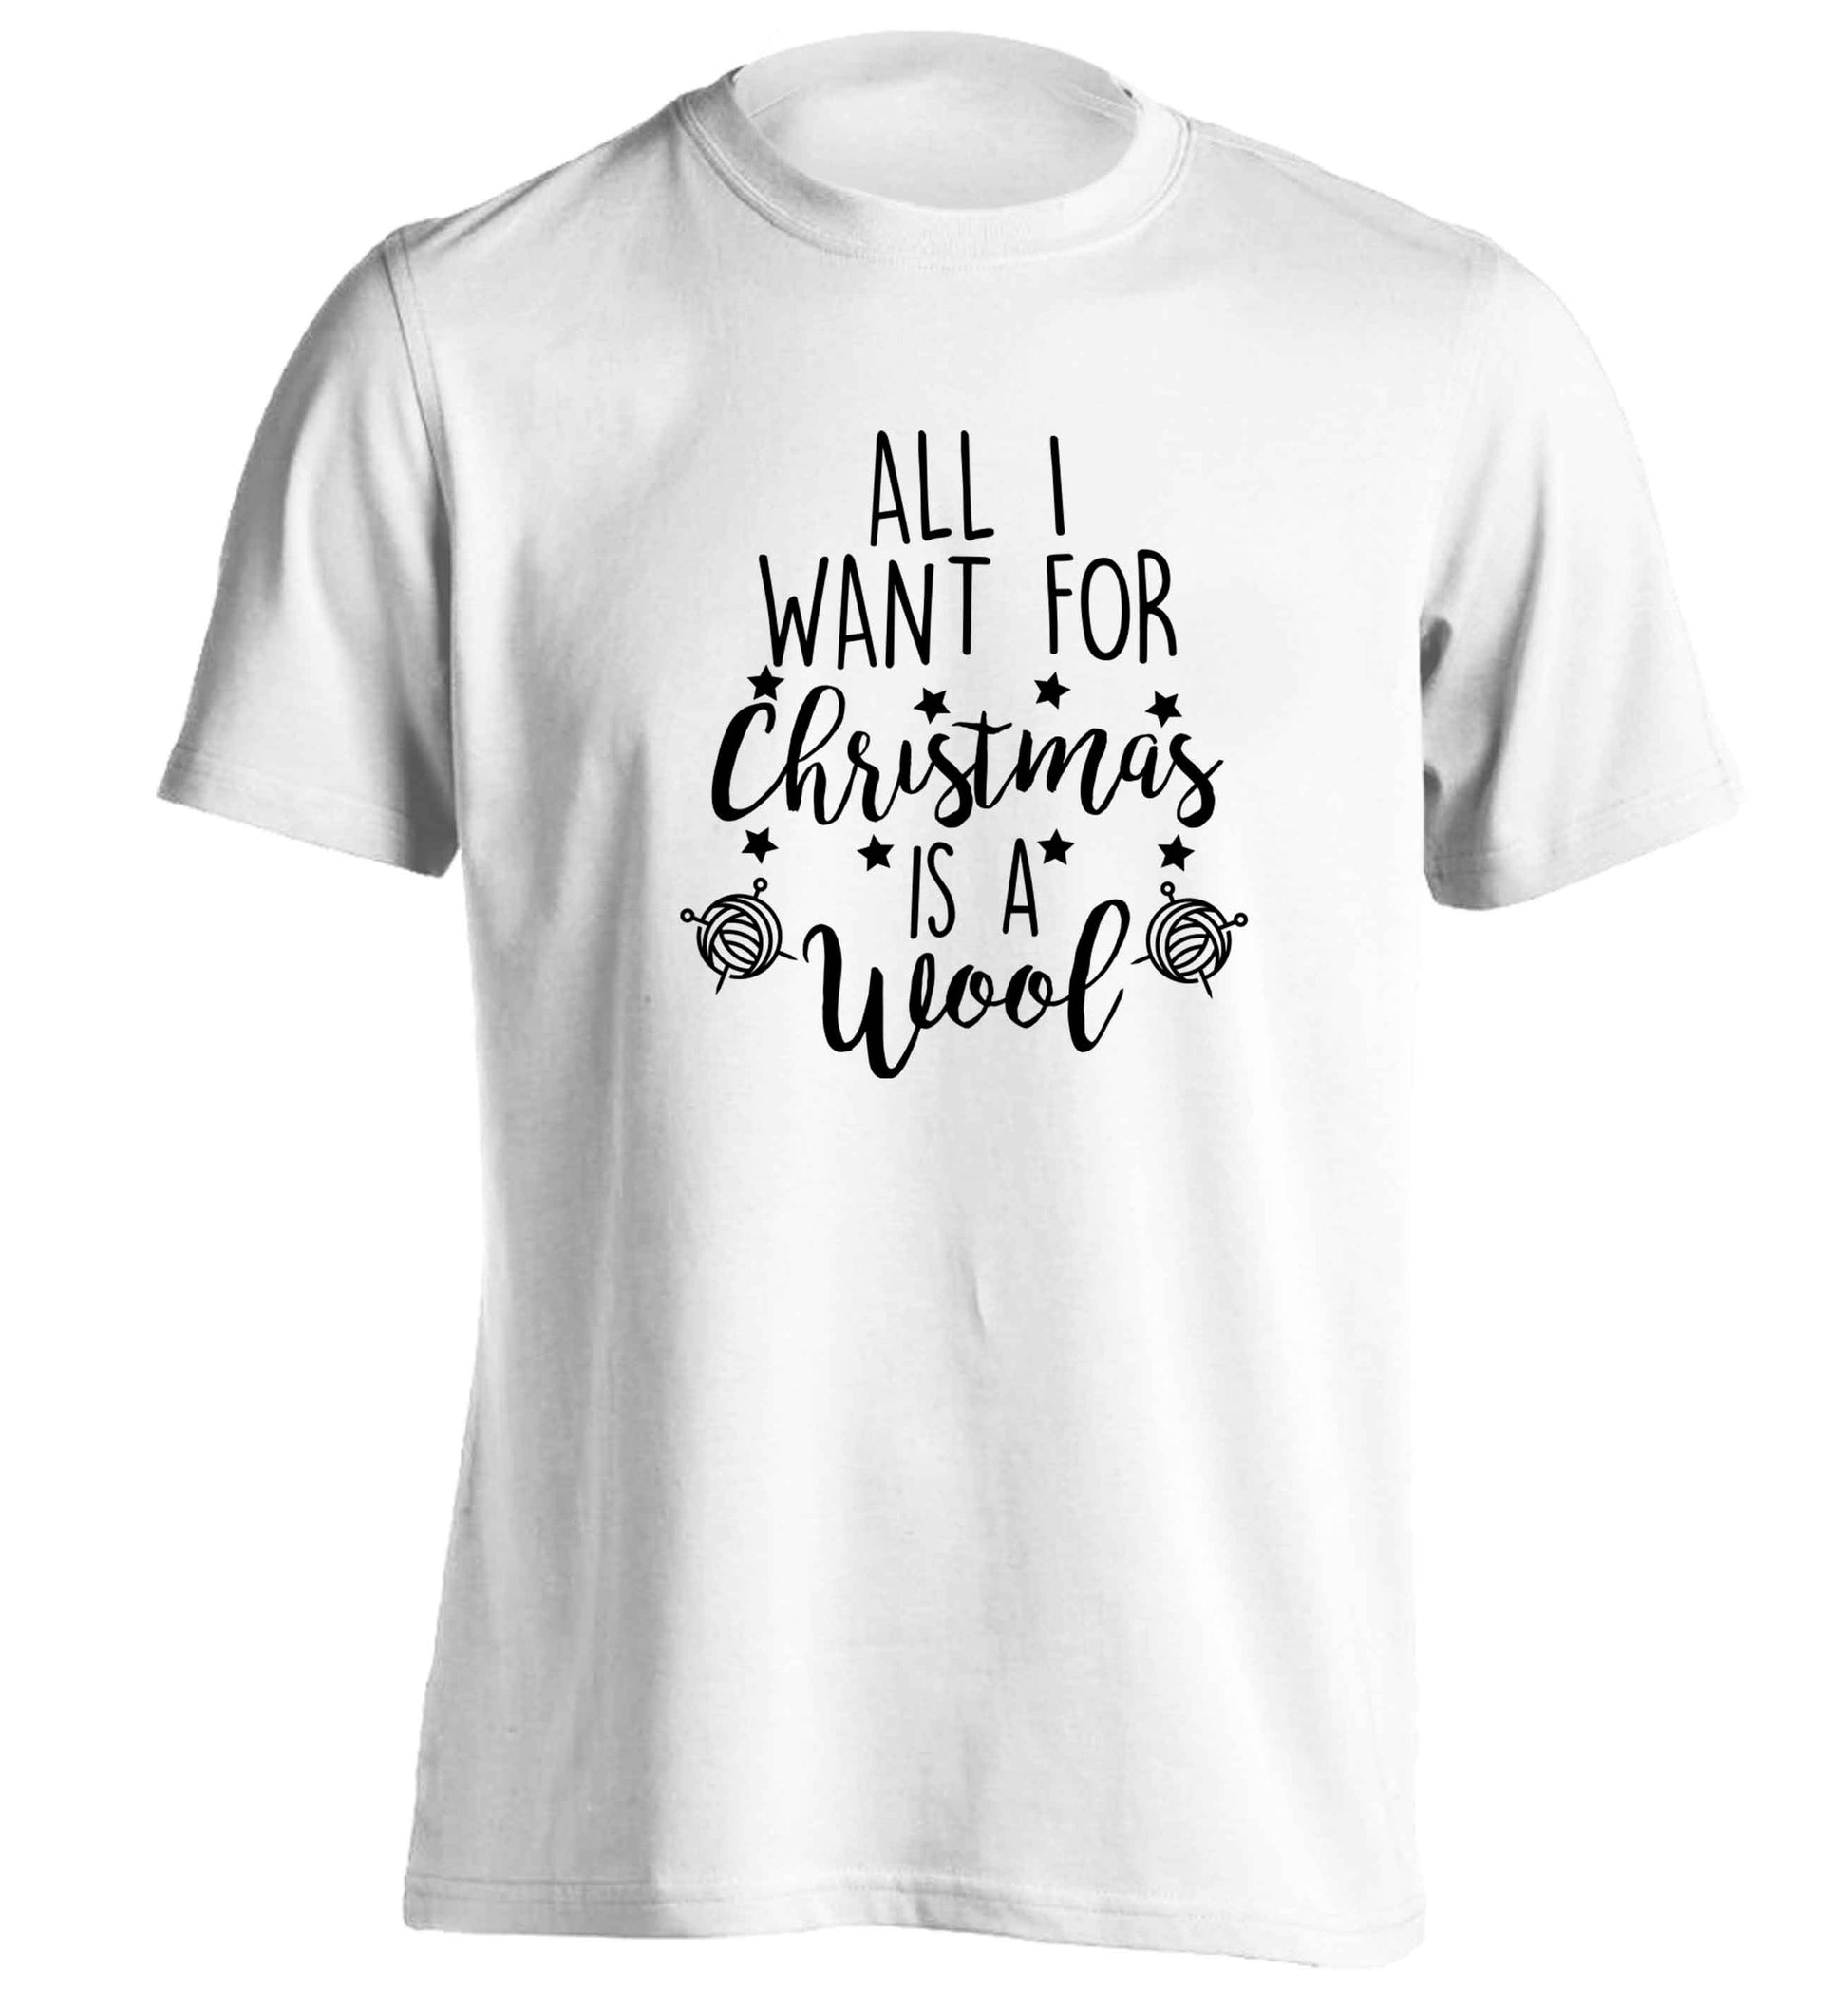 All I want for Christmas is wool! adults unisex white Tshirt 2XL